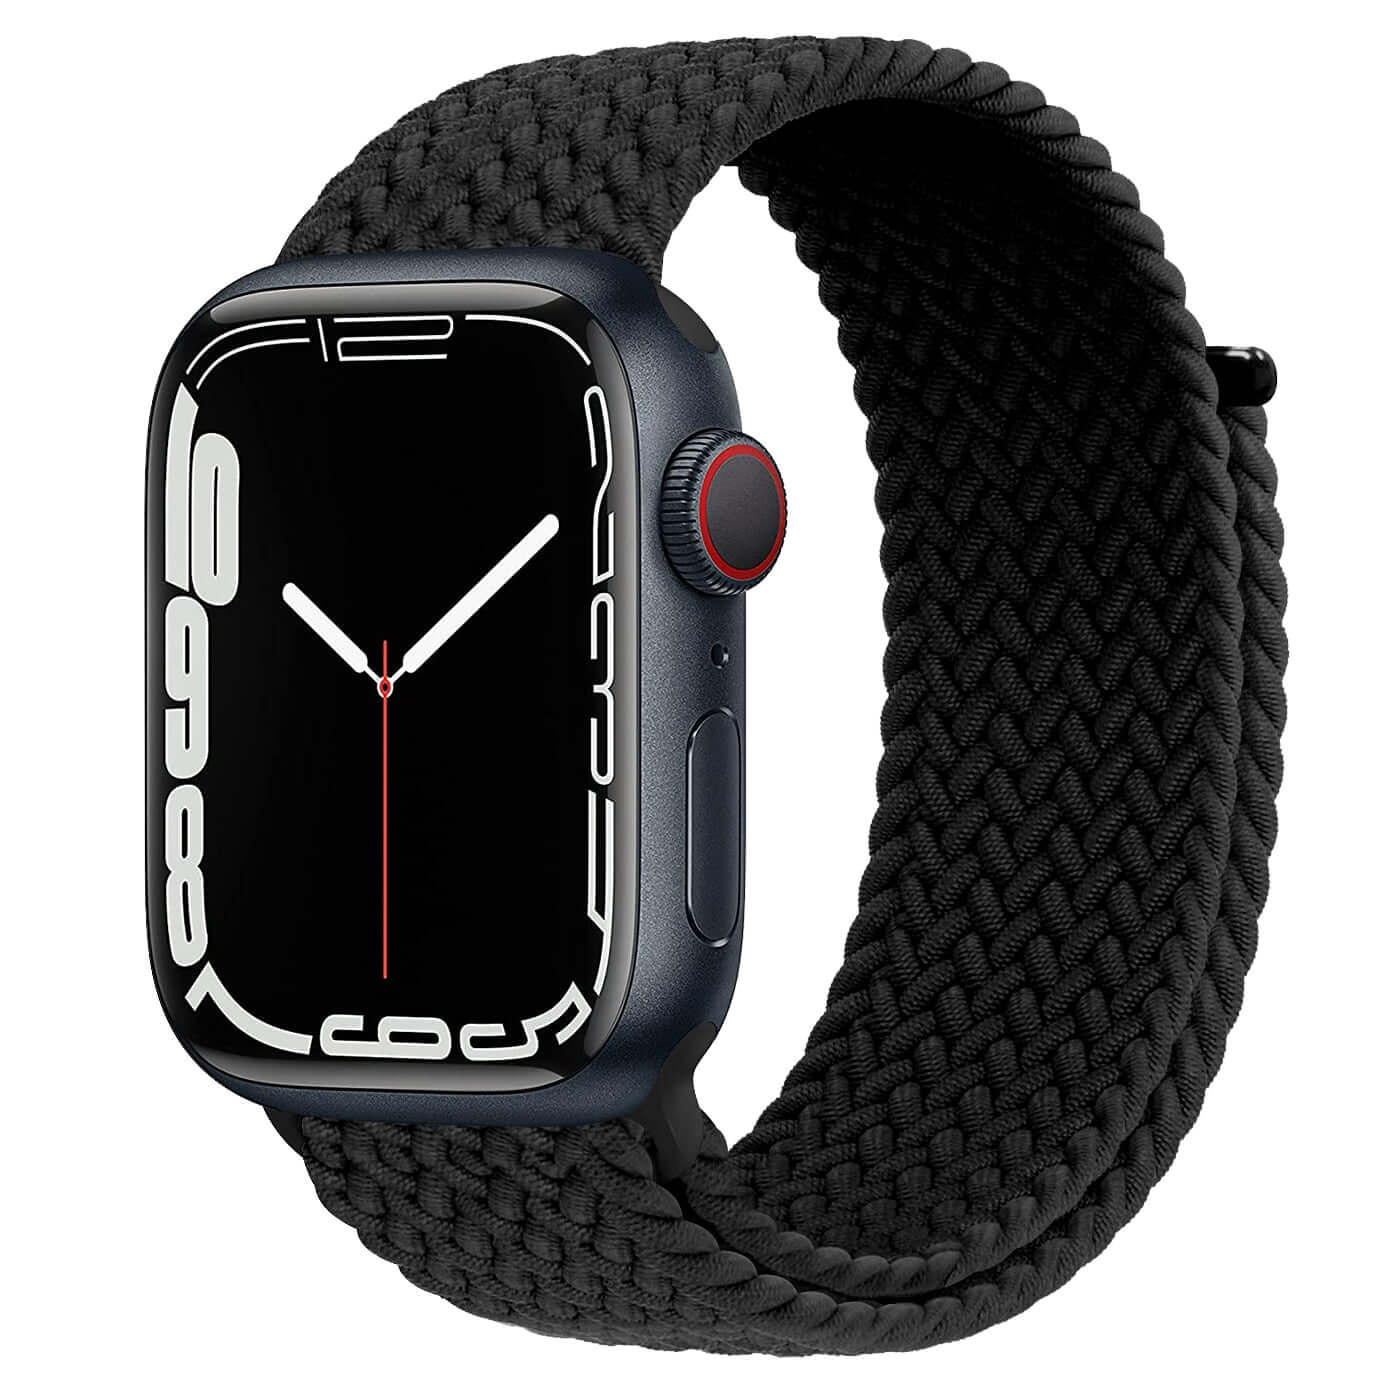 Atphoneshop.com Braided Band Charcoal for Apple Watch 